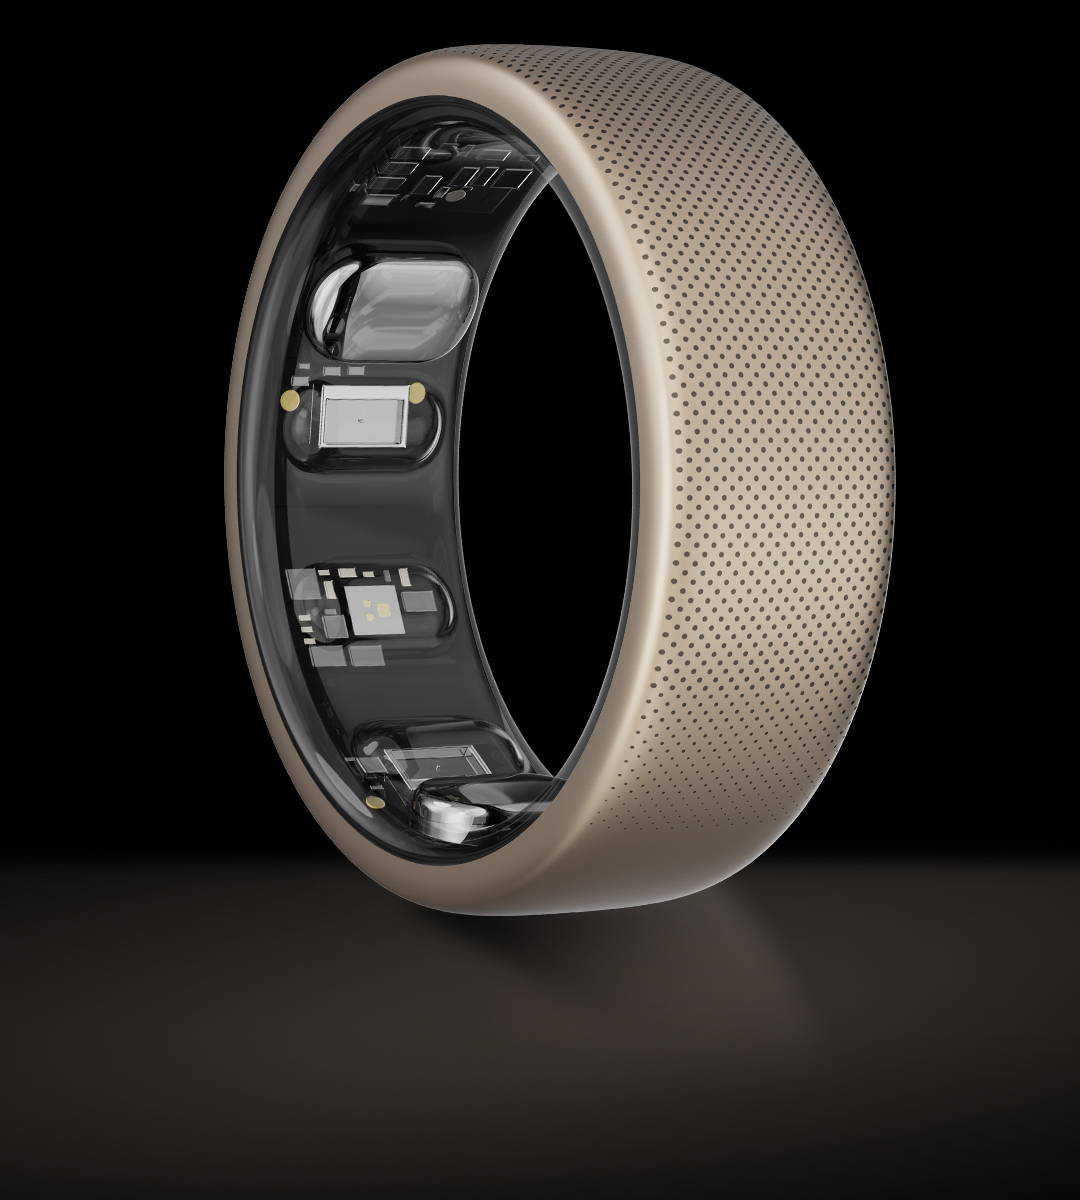 Fitness tracker is a wearable ring and smart assistant - Springwise